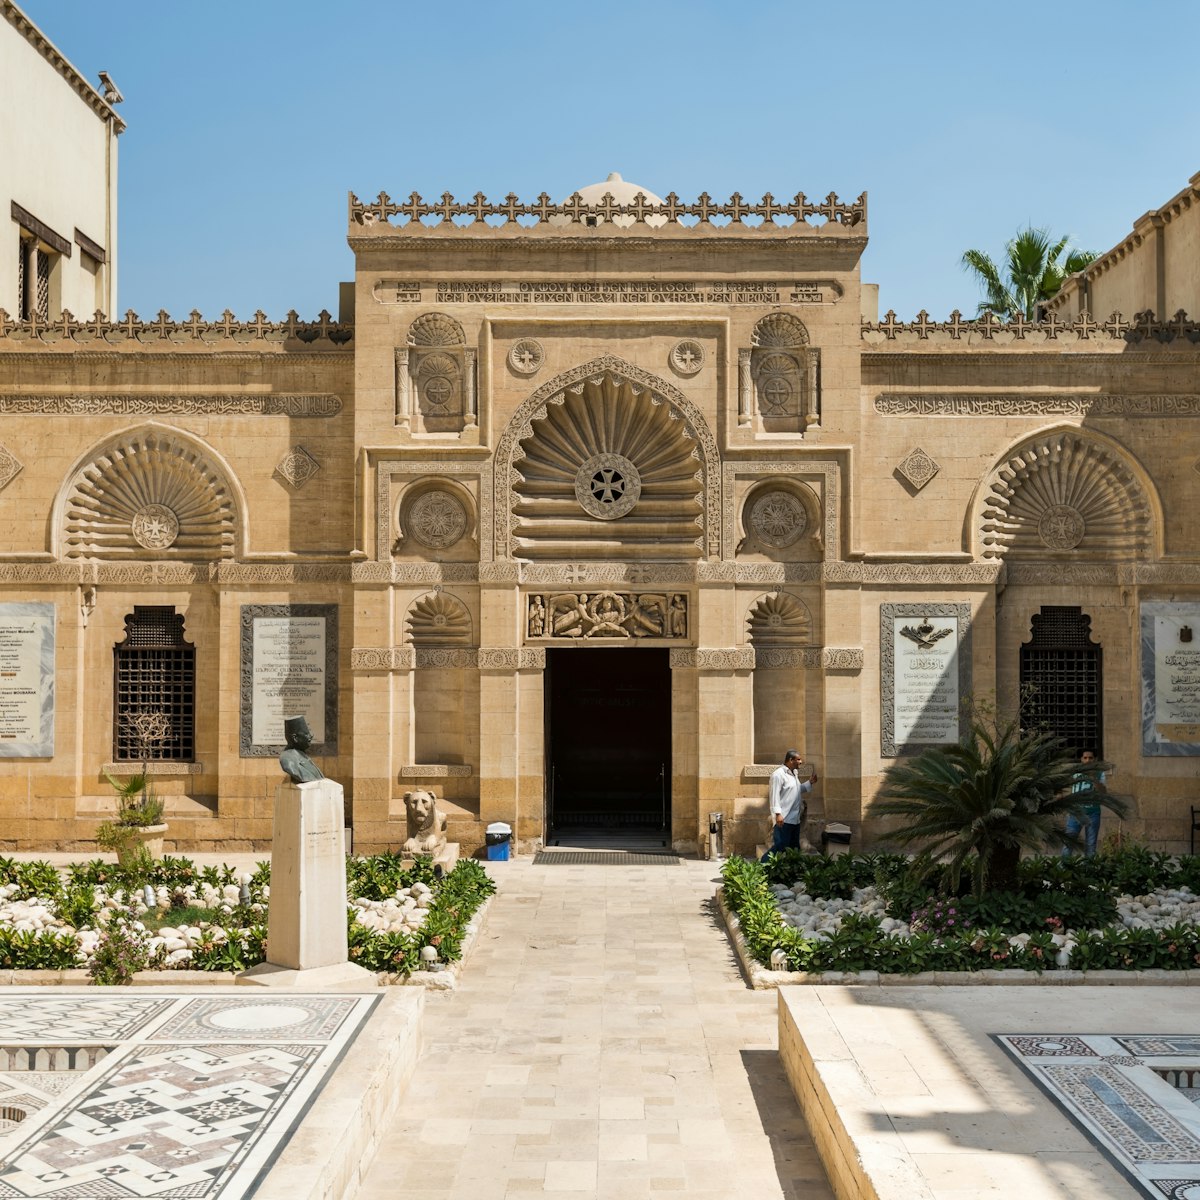 The Coptic Museum in Cairo, Egypt.